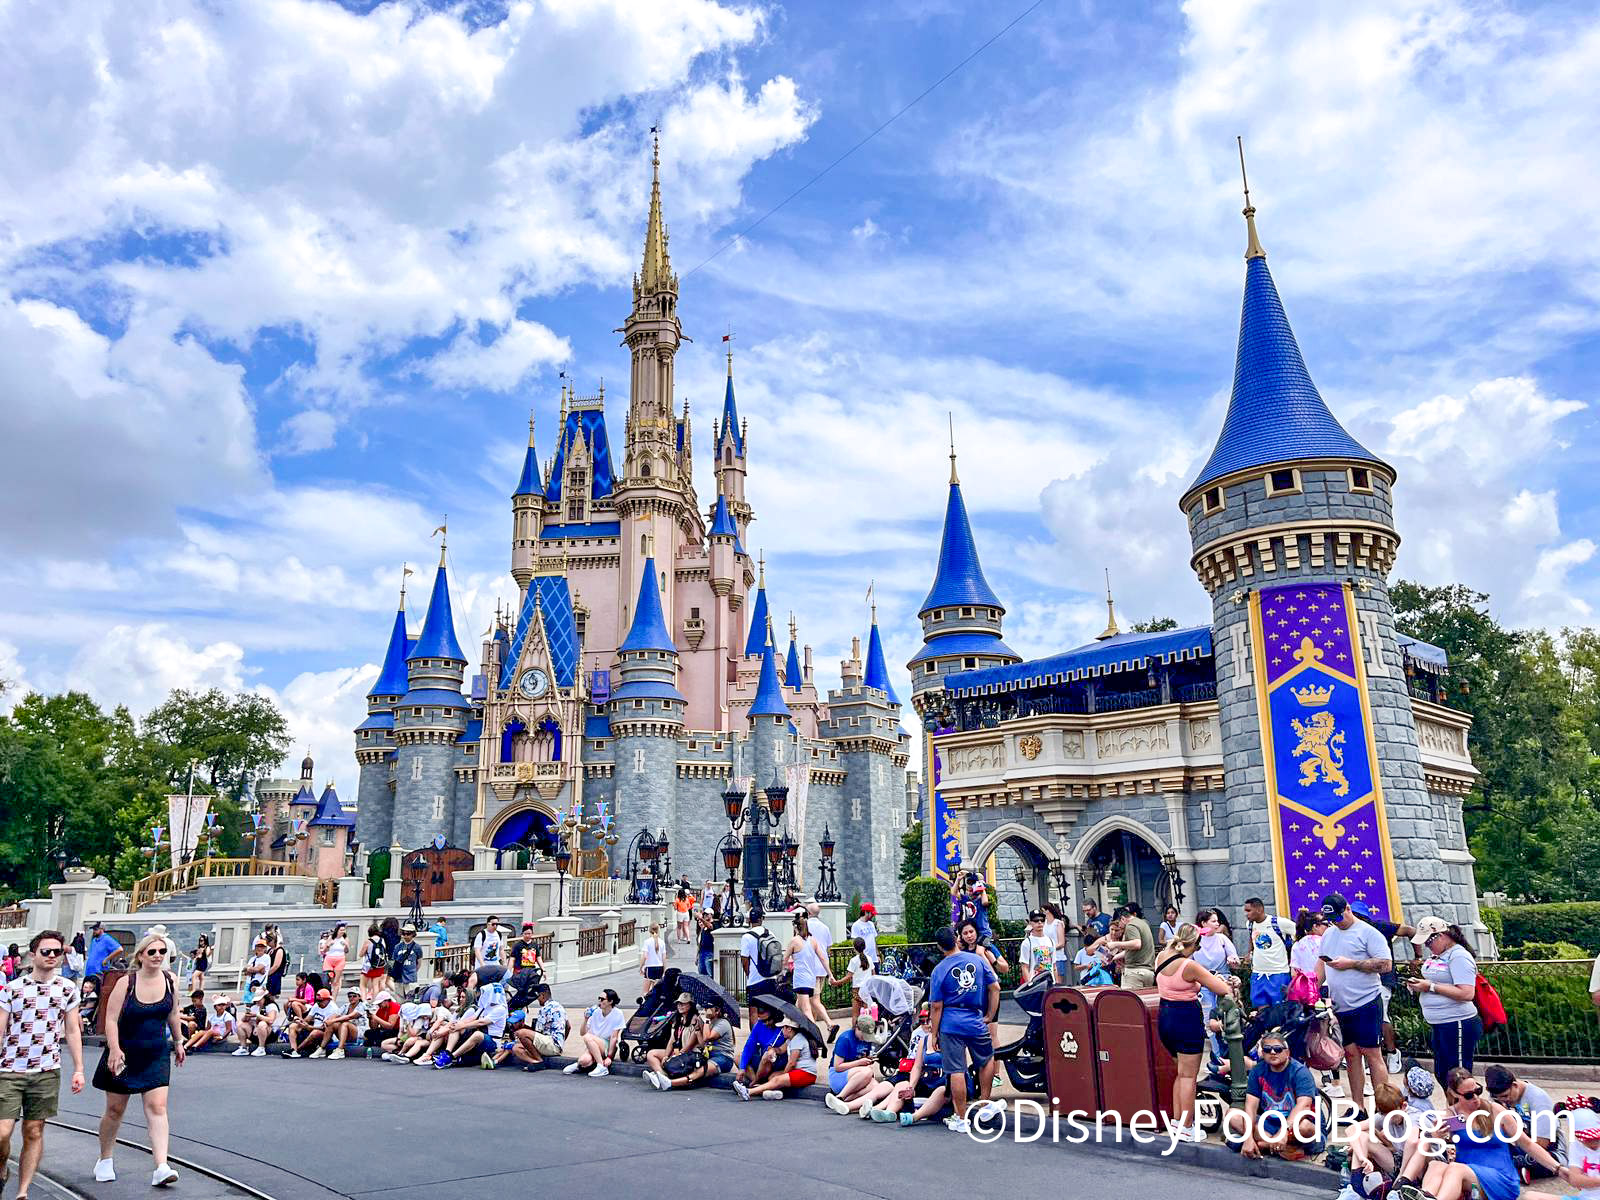 Disney World Crowds Have Gotten Unpredictable. Here’s How To Make That ...